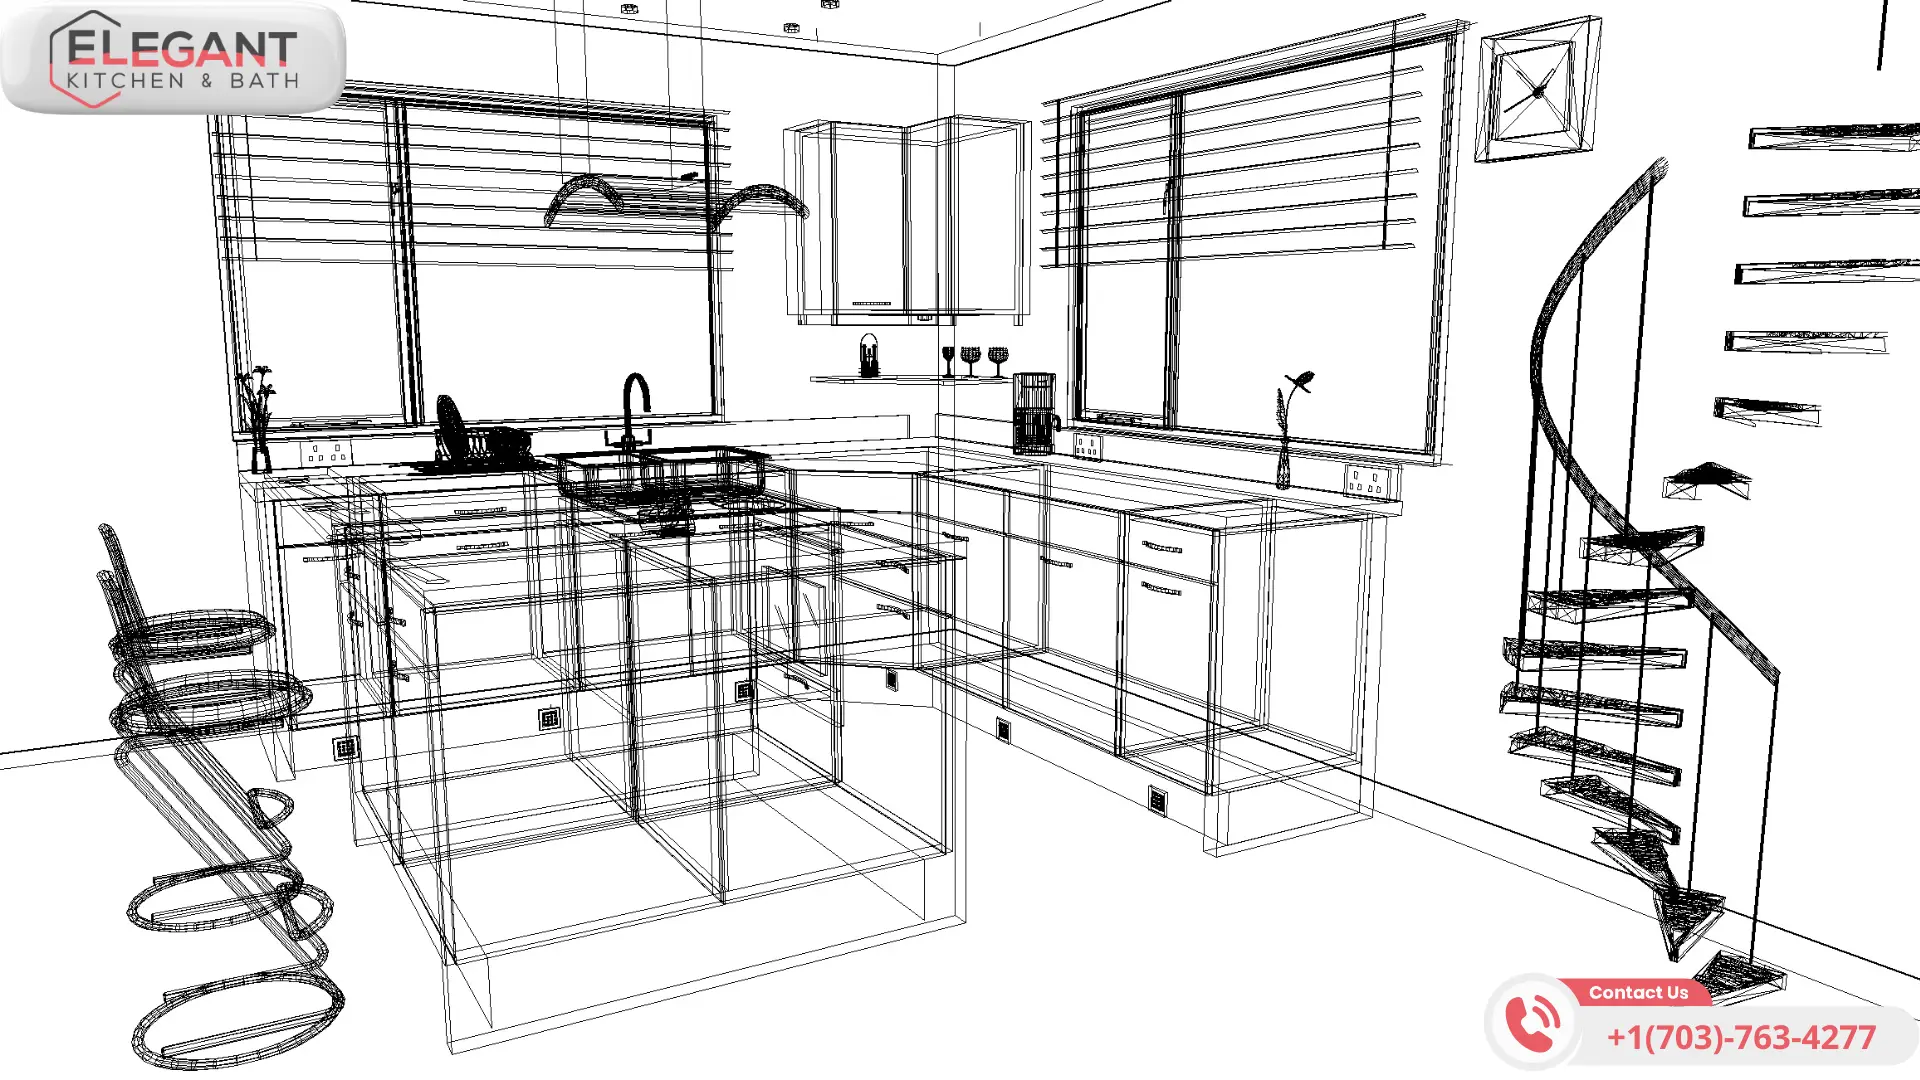 kitchen-space-optimization-with-3d designs in virginia with elegant kitchen and bath